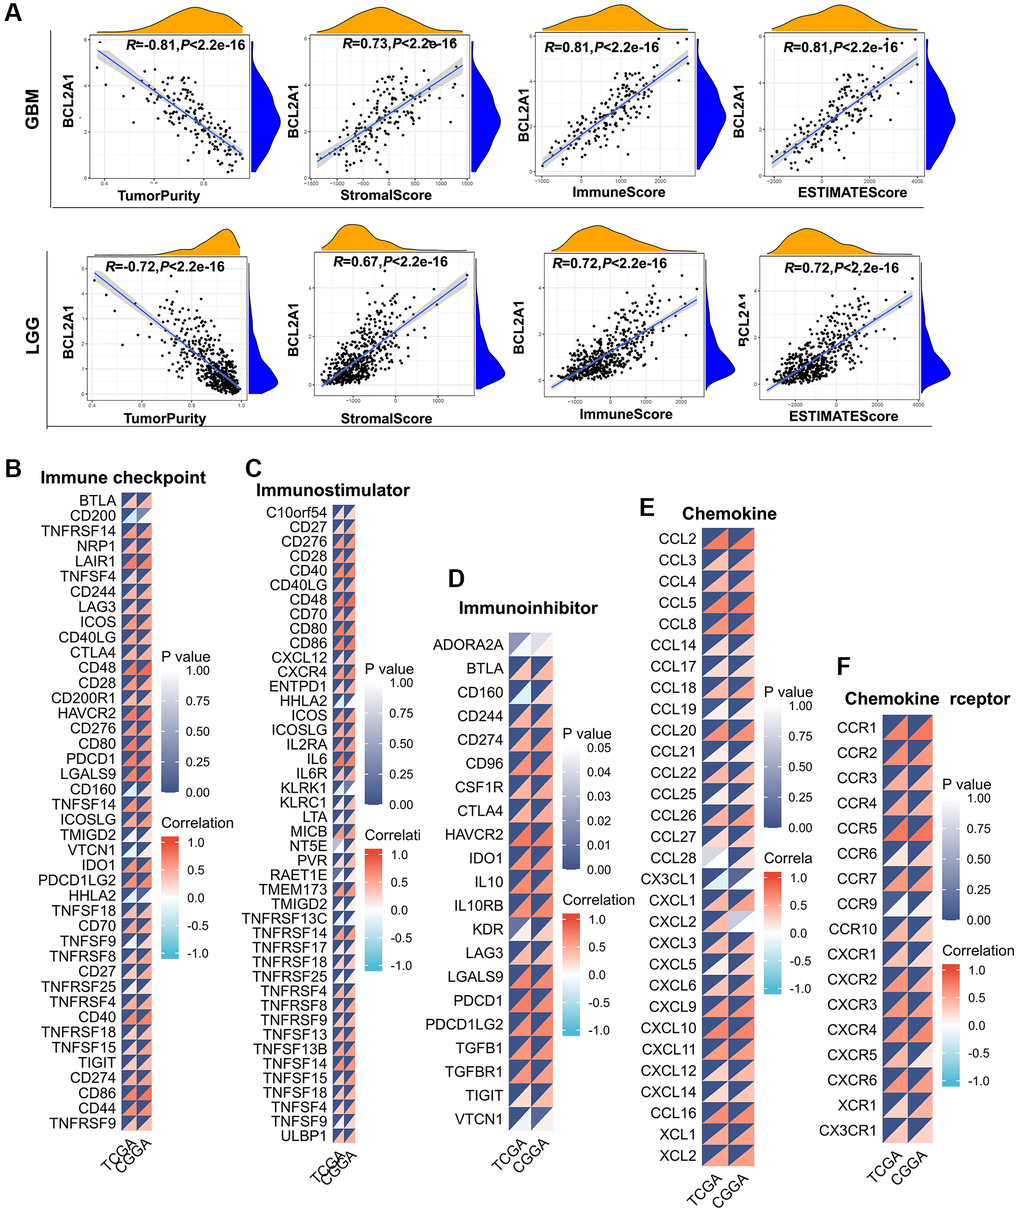 BCL2A1 was associated with immune infiltration and immune-related markers in gliomas. (A) Correlation between BCL2A1 expression and tumor purity, stromal score, immune score and ESTIMATE score in GBM and LGG. (B) Correlation between BCL2A1 expression and immune checkpoint gene expression. (C) Correlation between BCL2A1 expression and immune activation gene expression. (D) Correlation between BCL2A1 and immunosuppressive genes. (E) Correlation between BCL2A1 and chemokines. (F) Correlation between BCL2A1 and chemokine receptors.